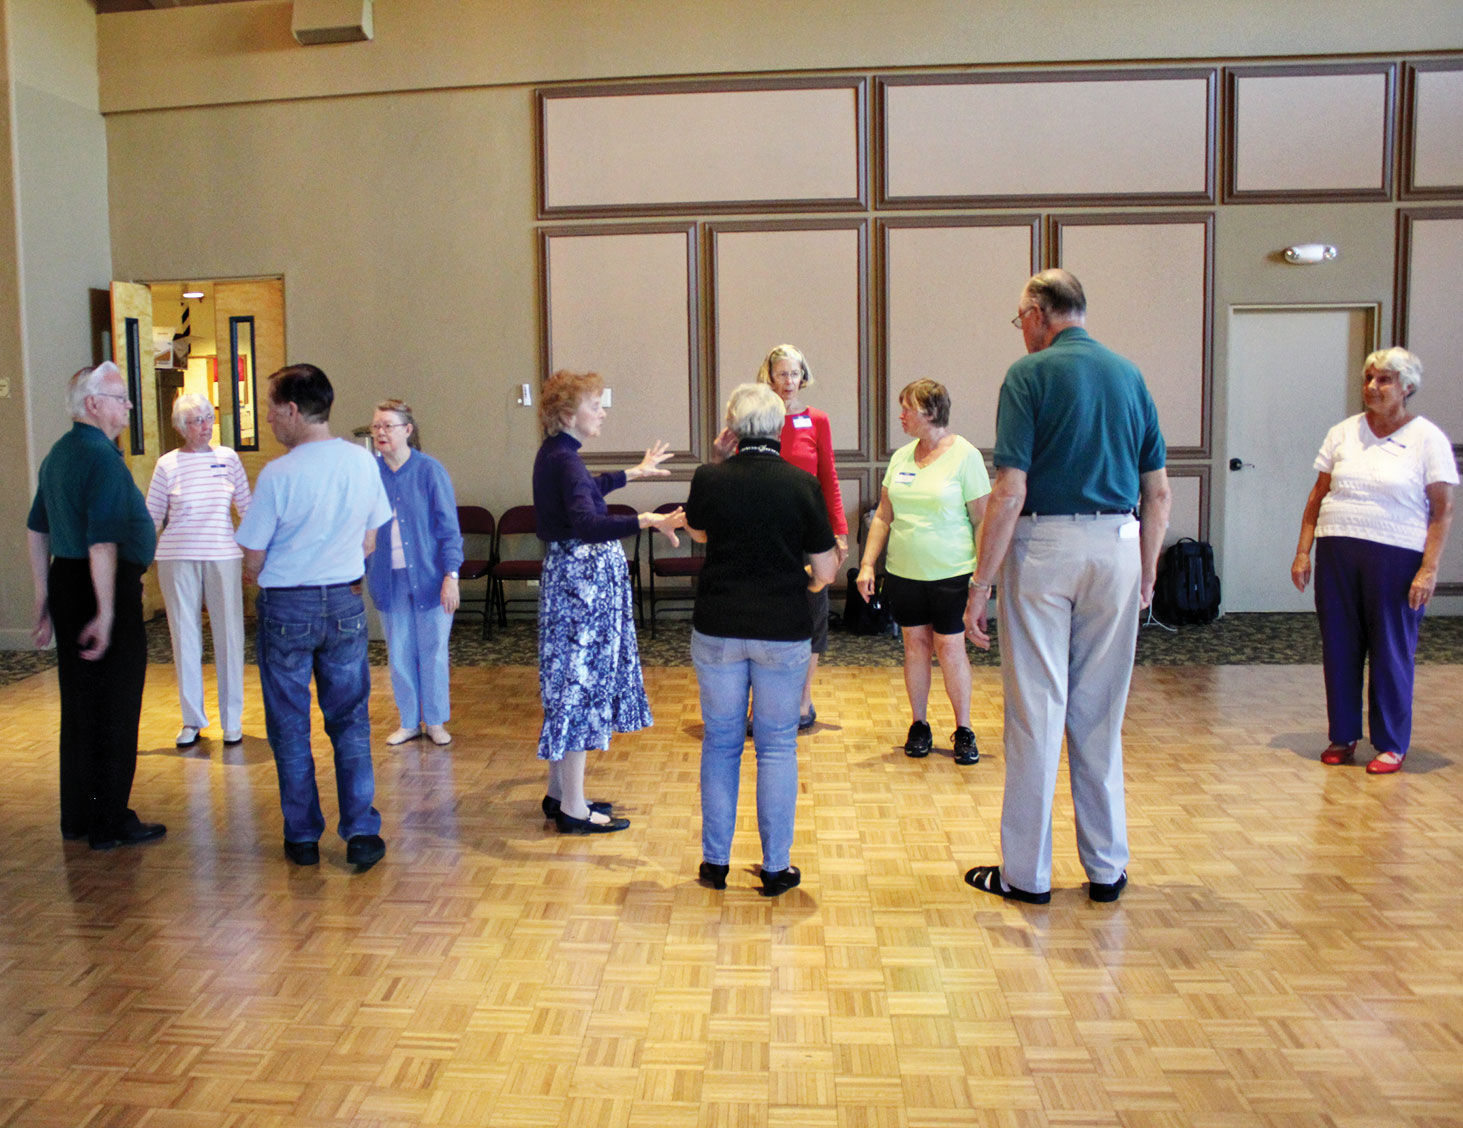 Some of our new dancers as well as longtime dancers are learning English Country dance from Enid Fowler, our very talented instructor.